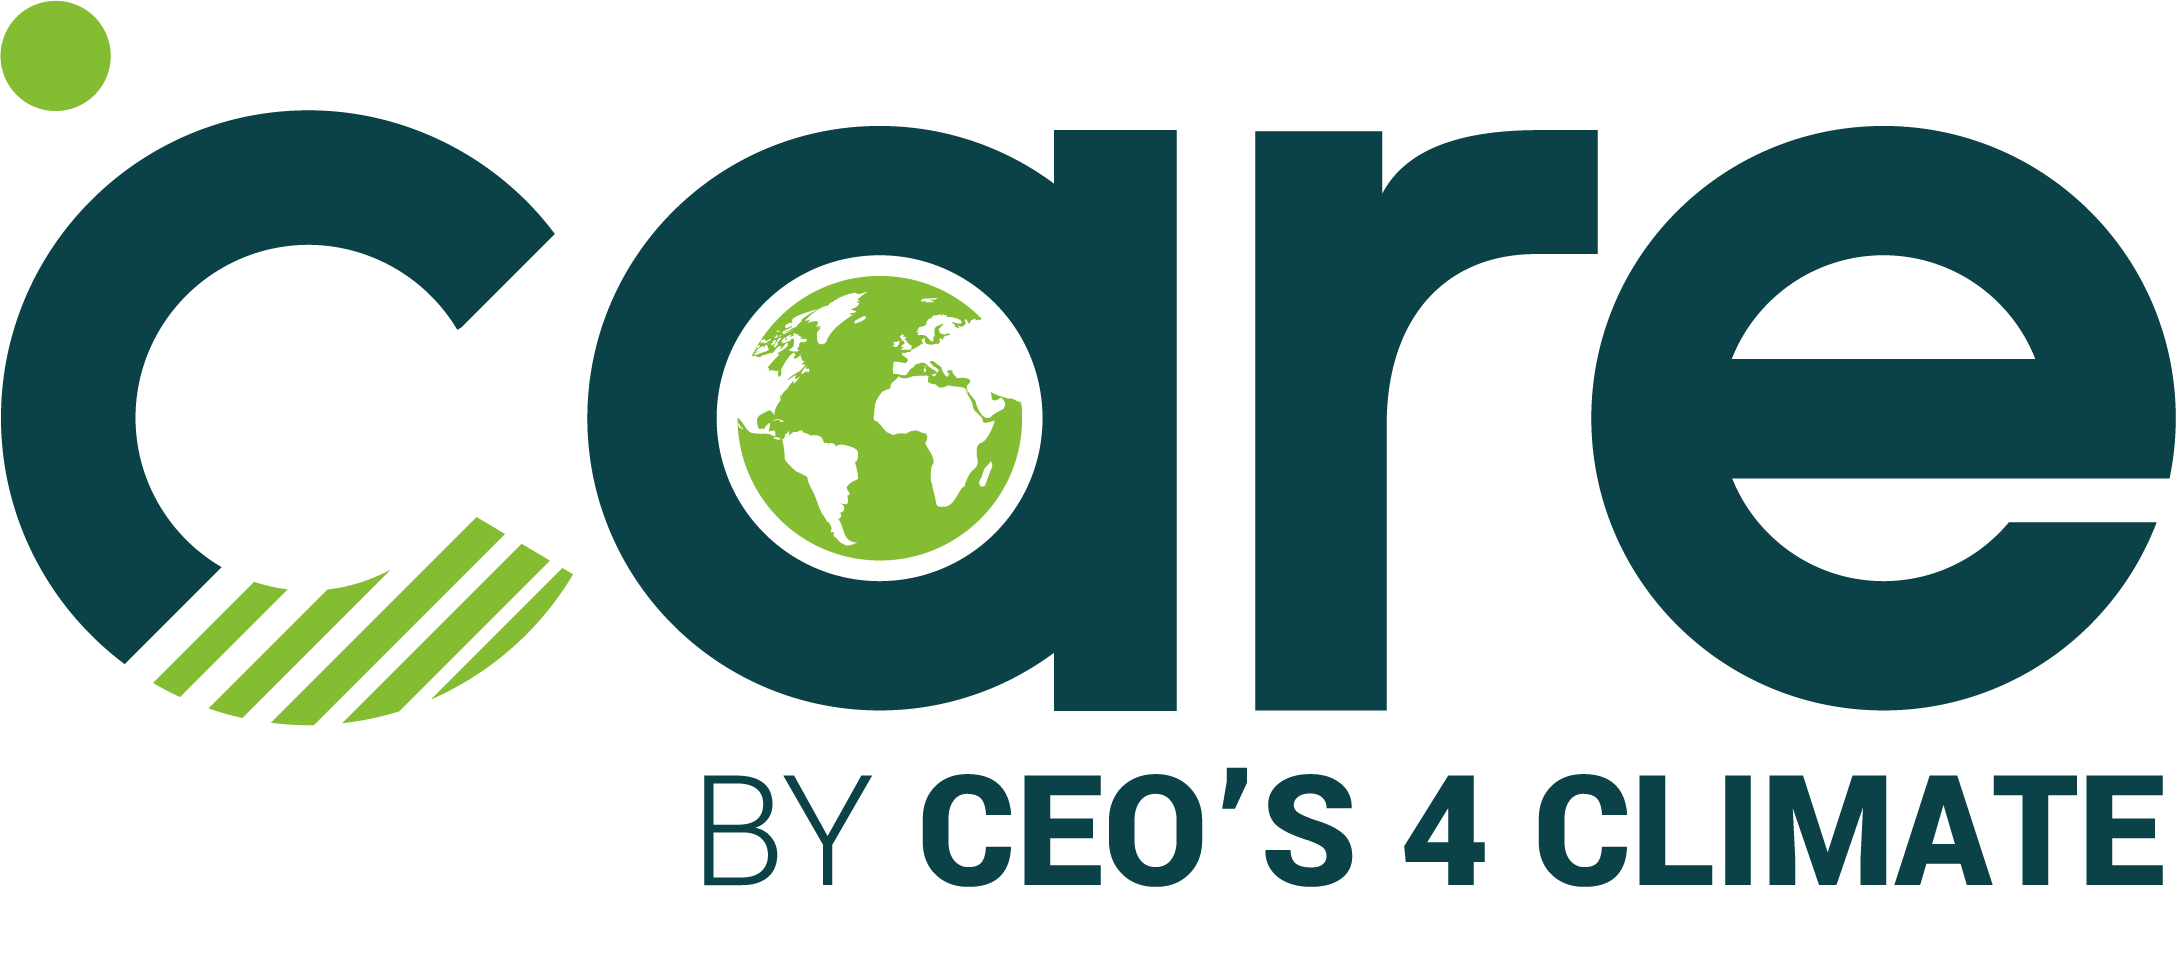 Care by CEOs4Climate_logo